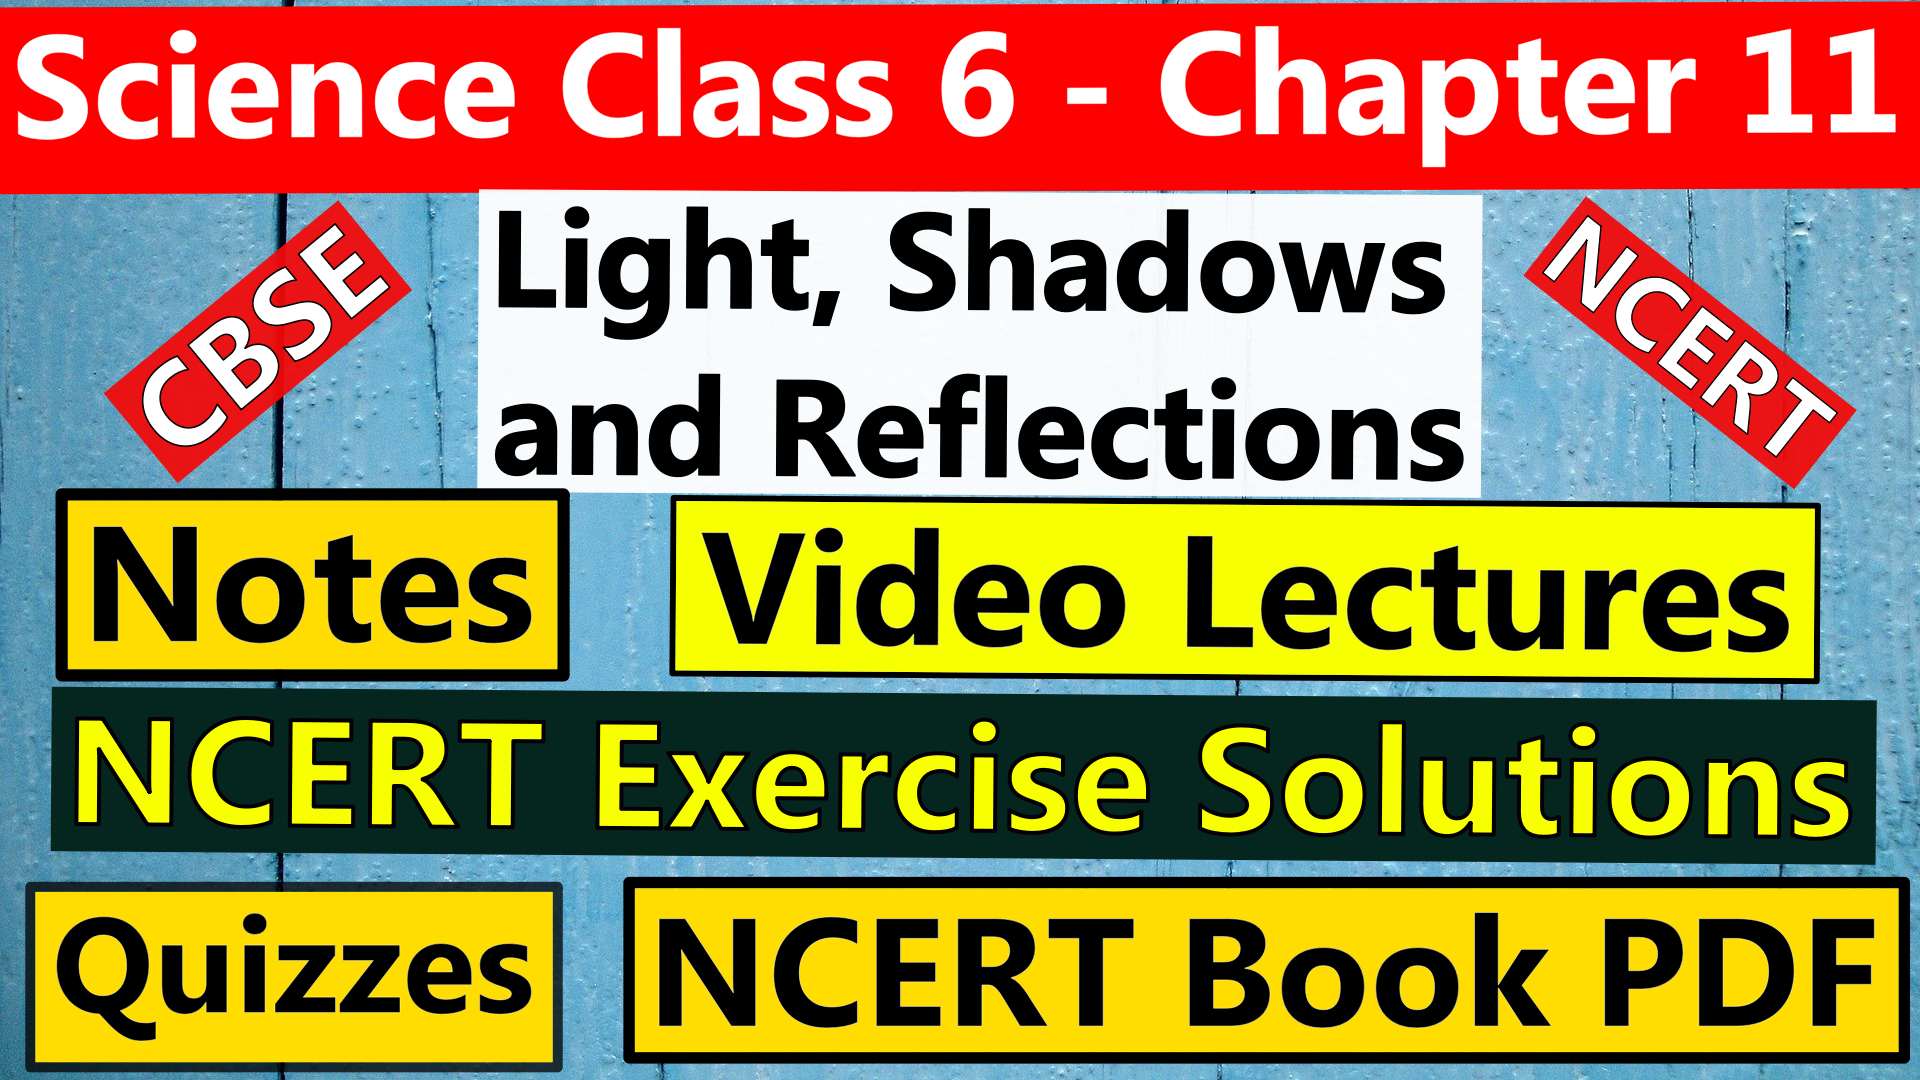 Science Class 6 - Chapter 11 -Light, Shadows and Reflections